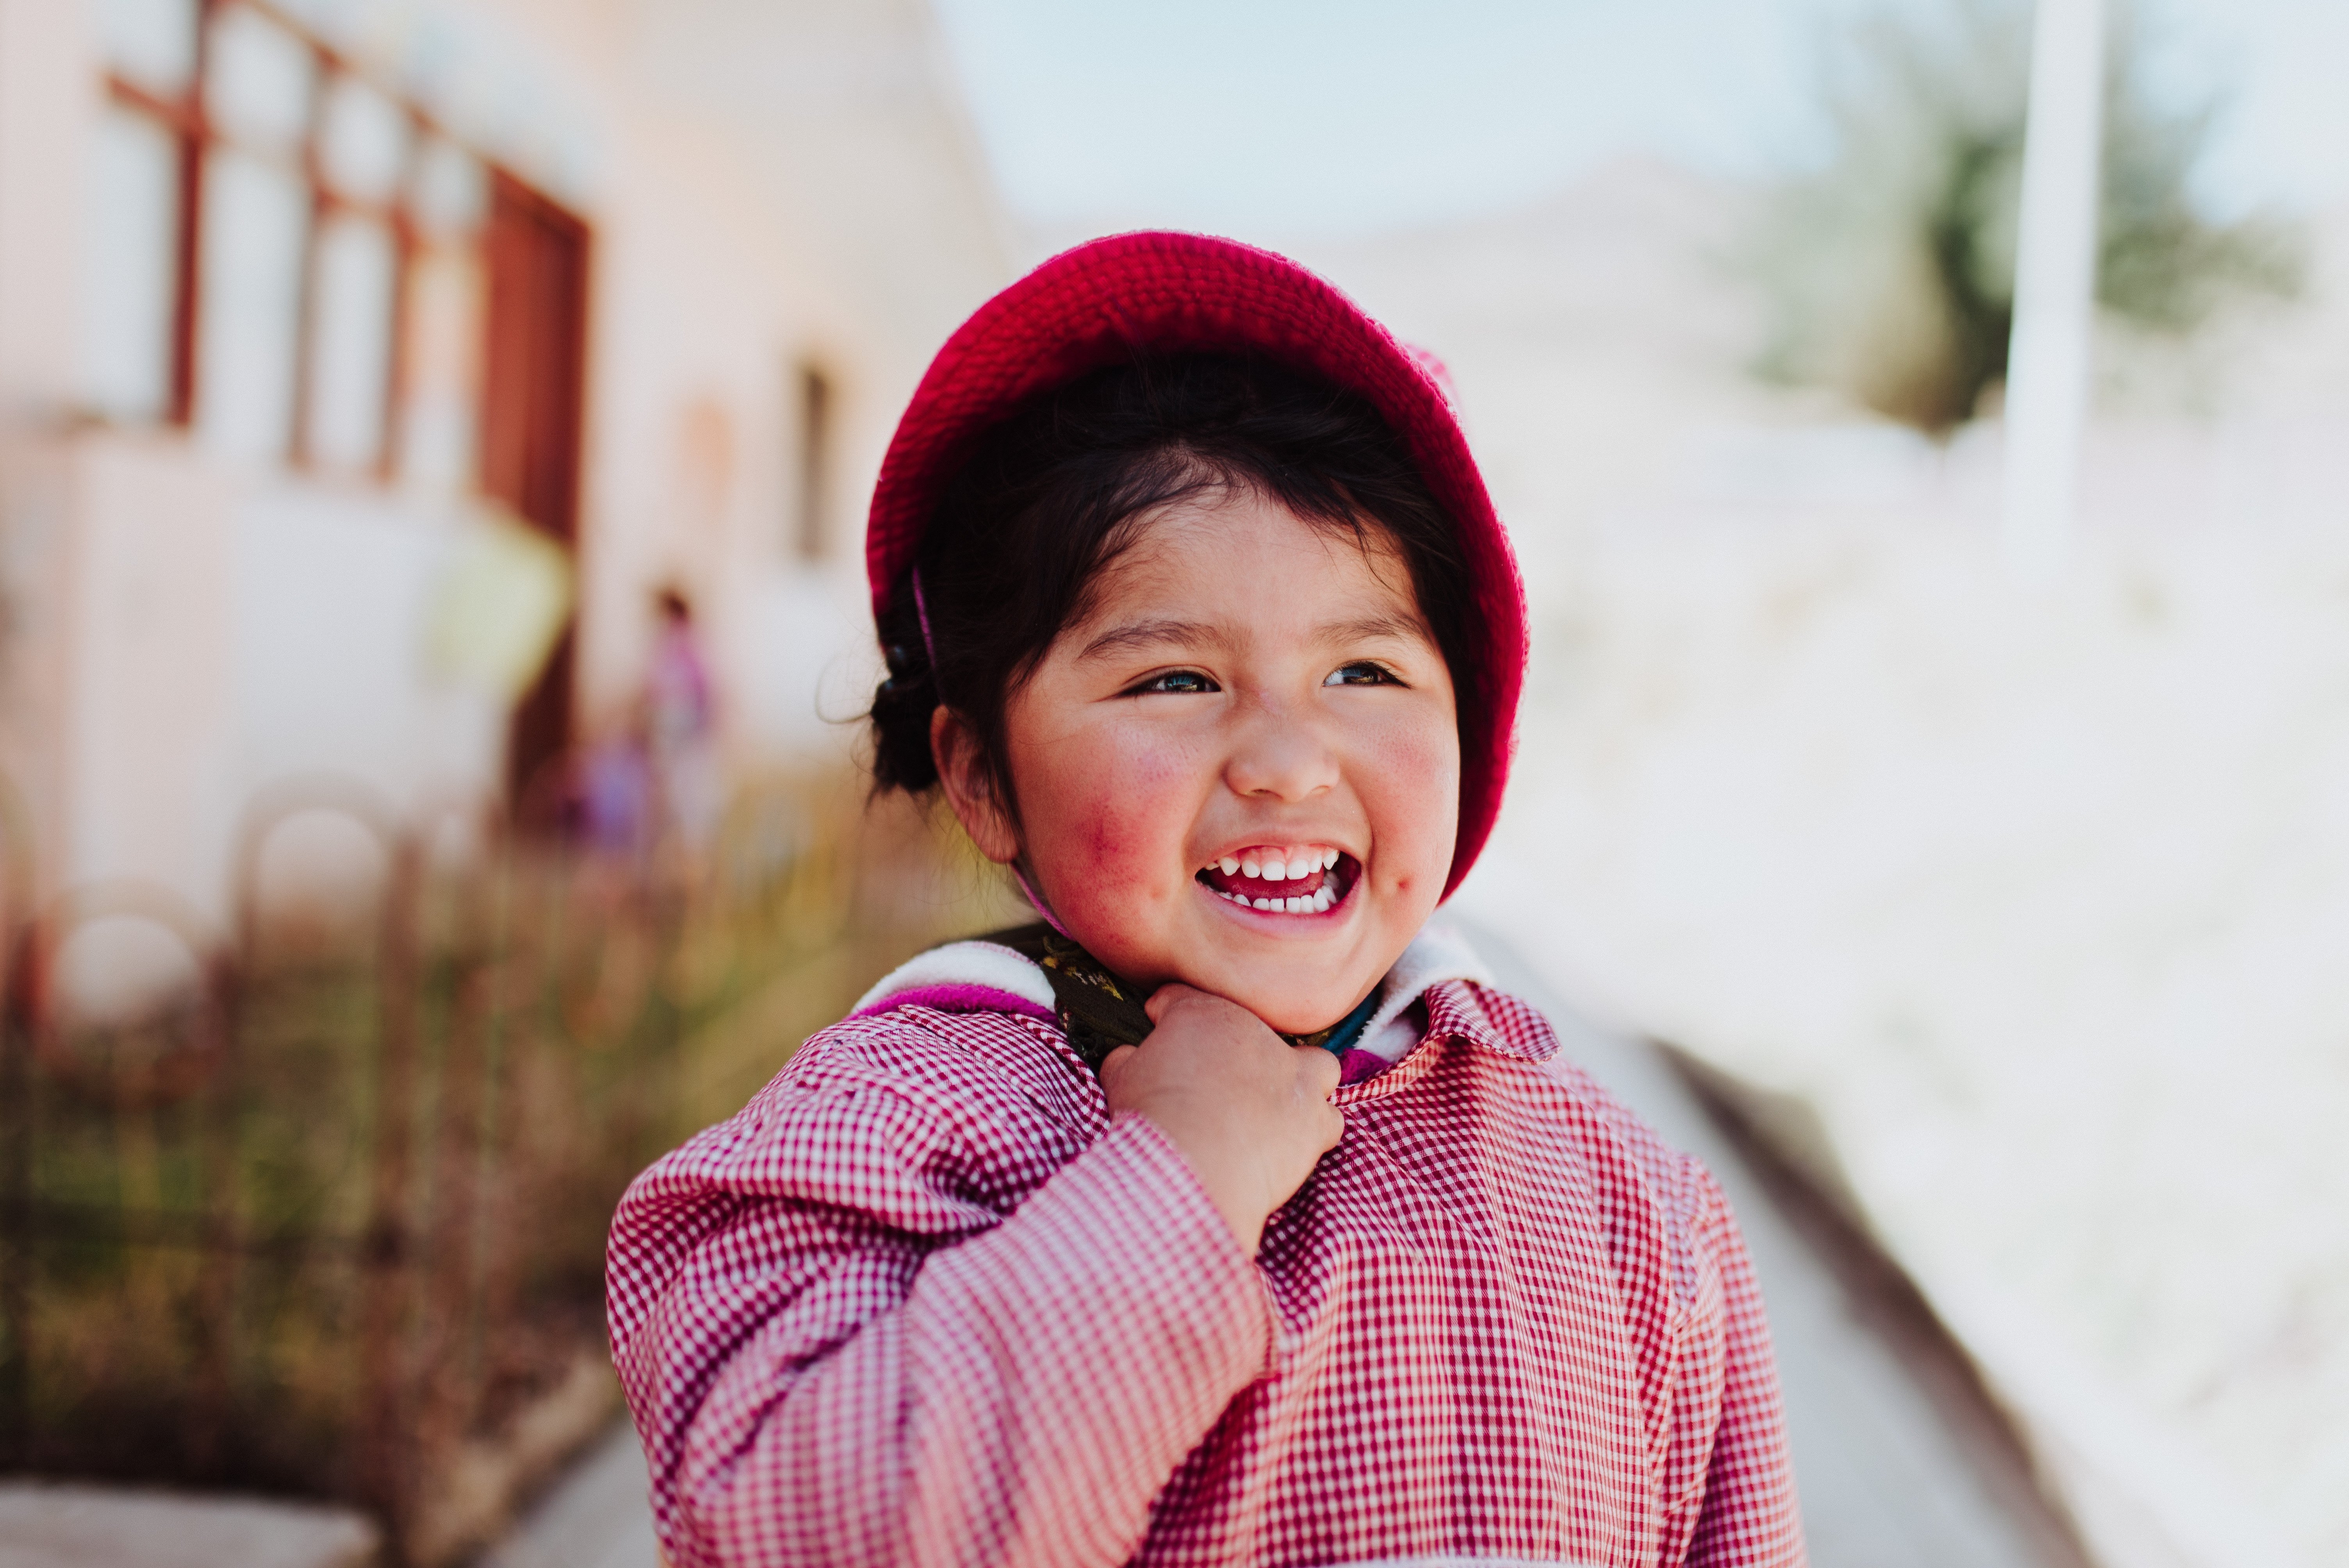 Photo of a little girl smiling. | Source: Unsplash